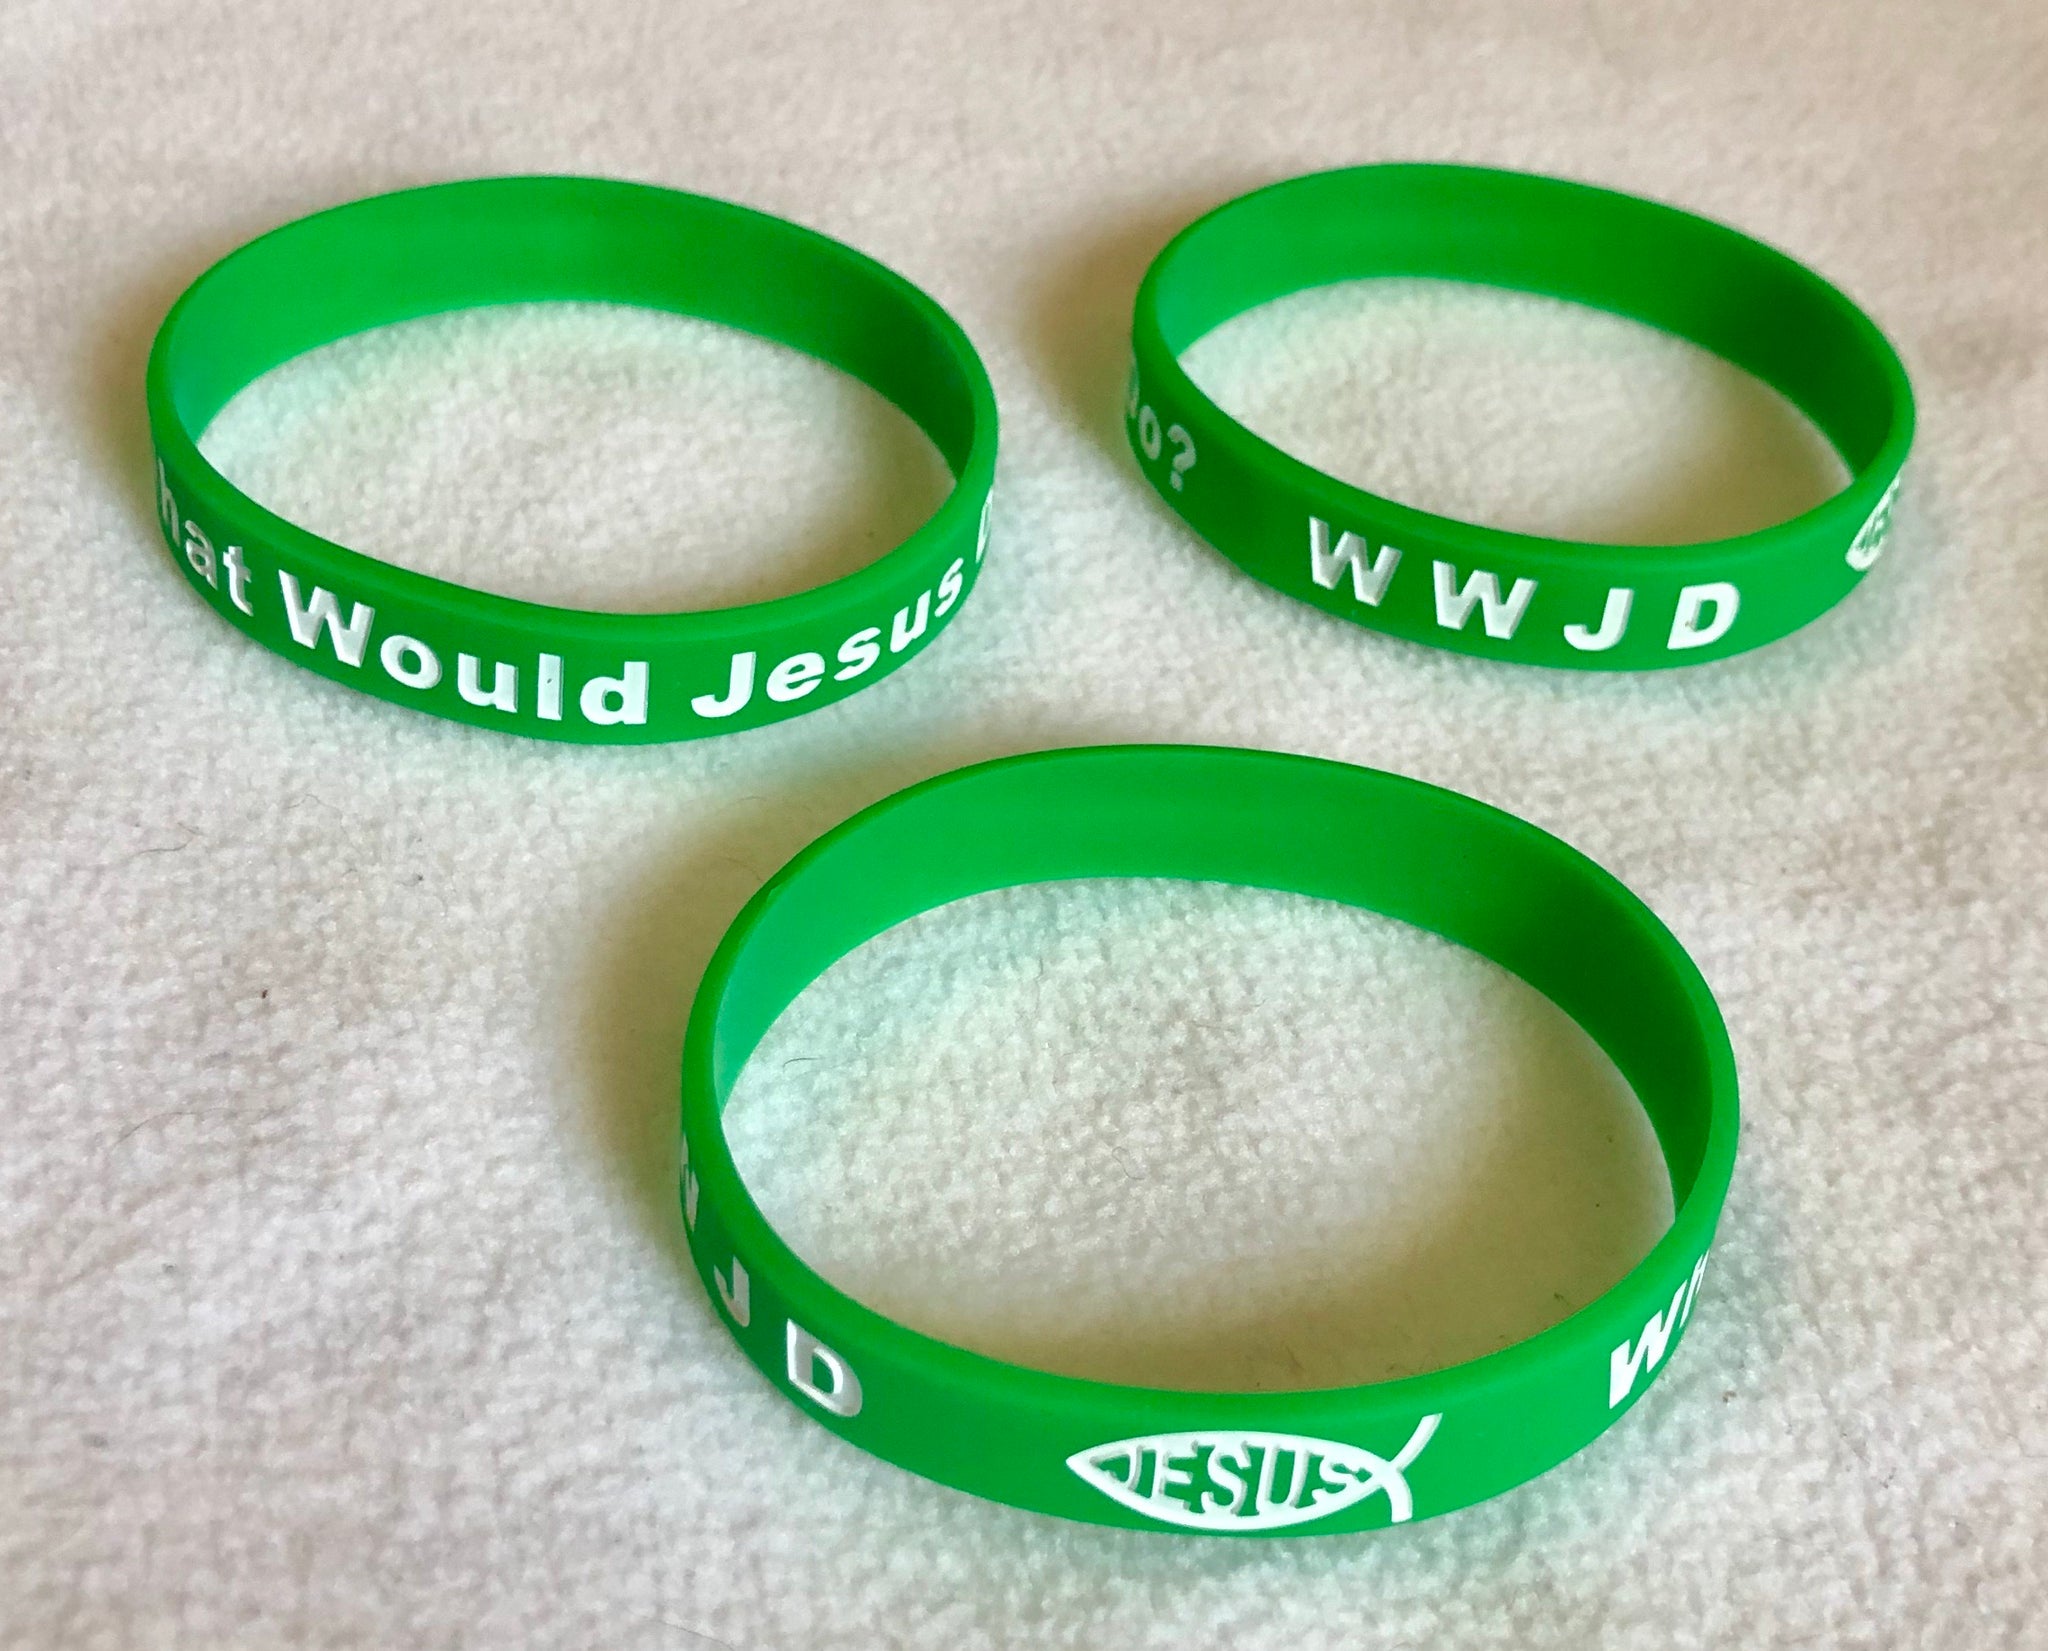 WWJD - What Would Jesus Do Silicone Wristband (Pink and Purple) - PUBLICISE  JESUS